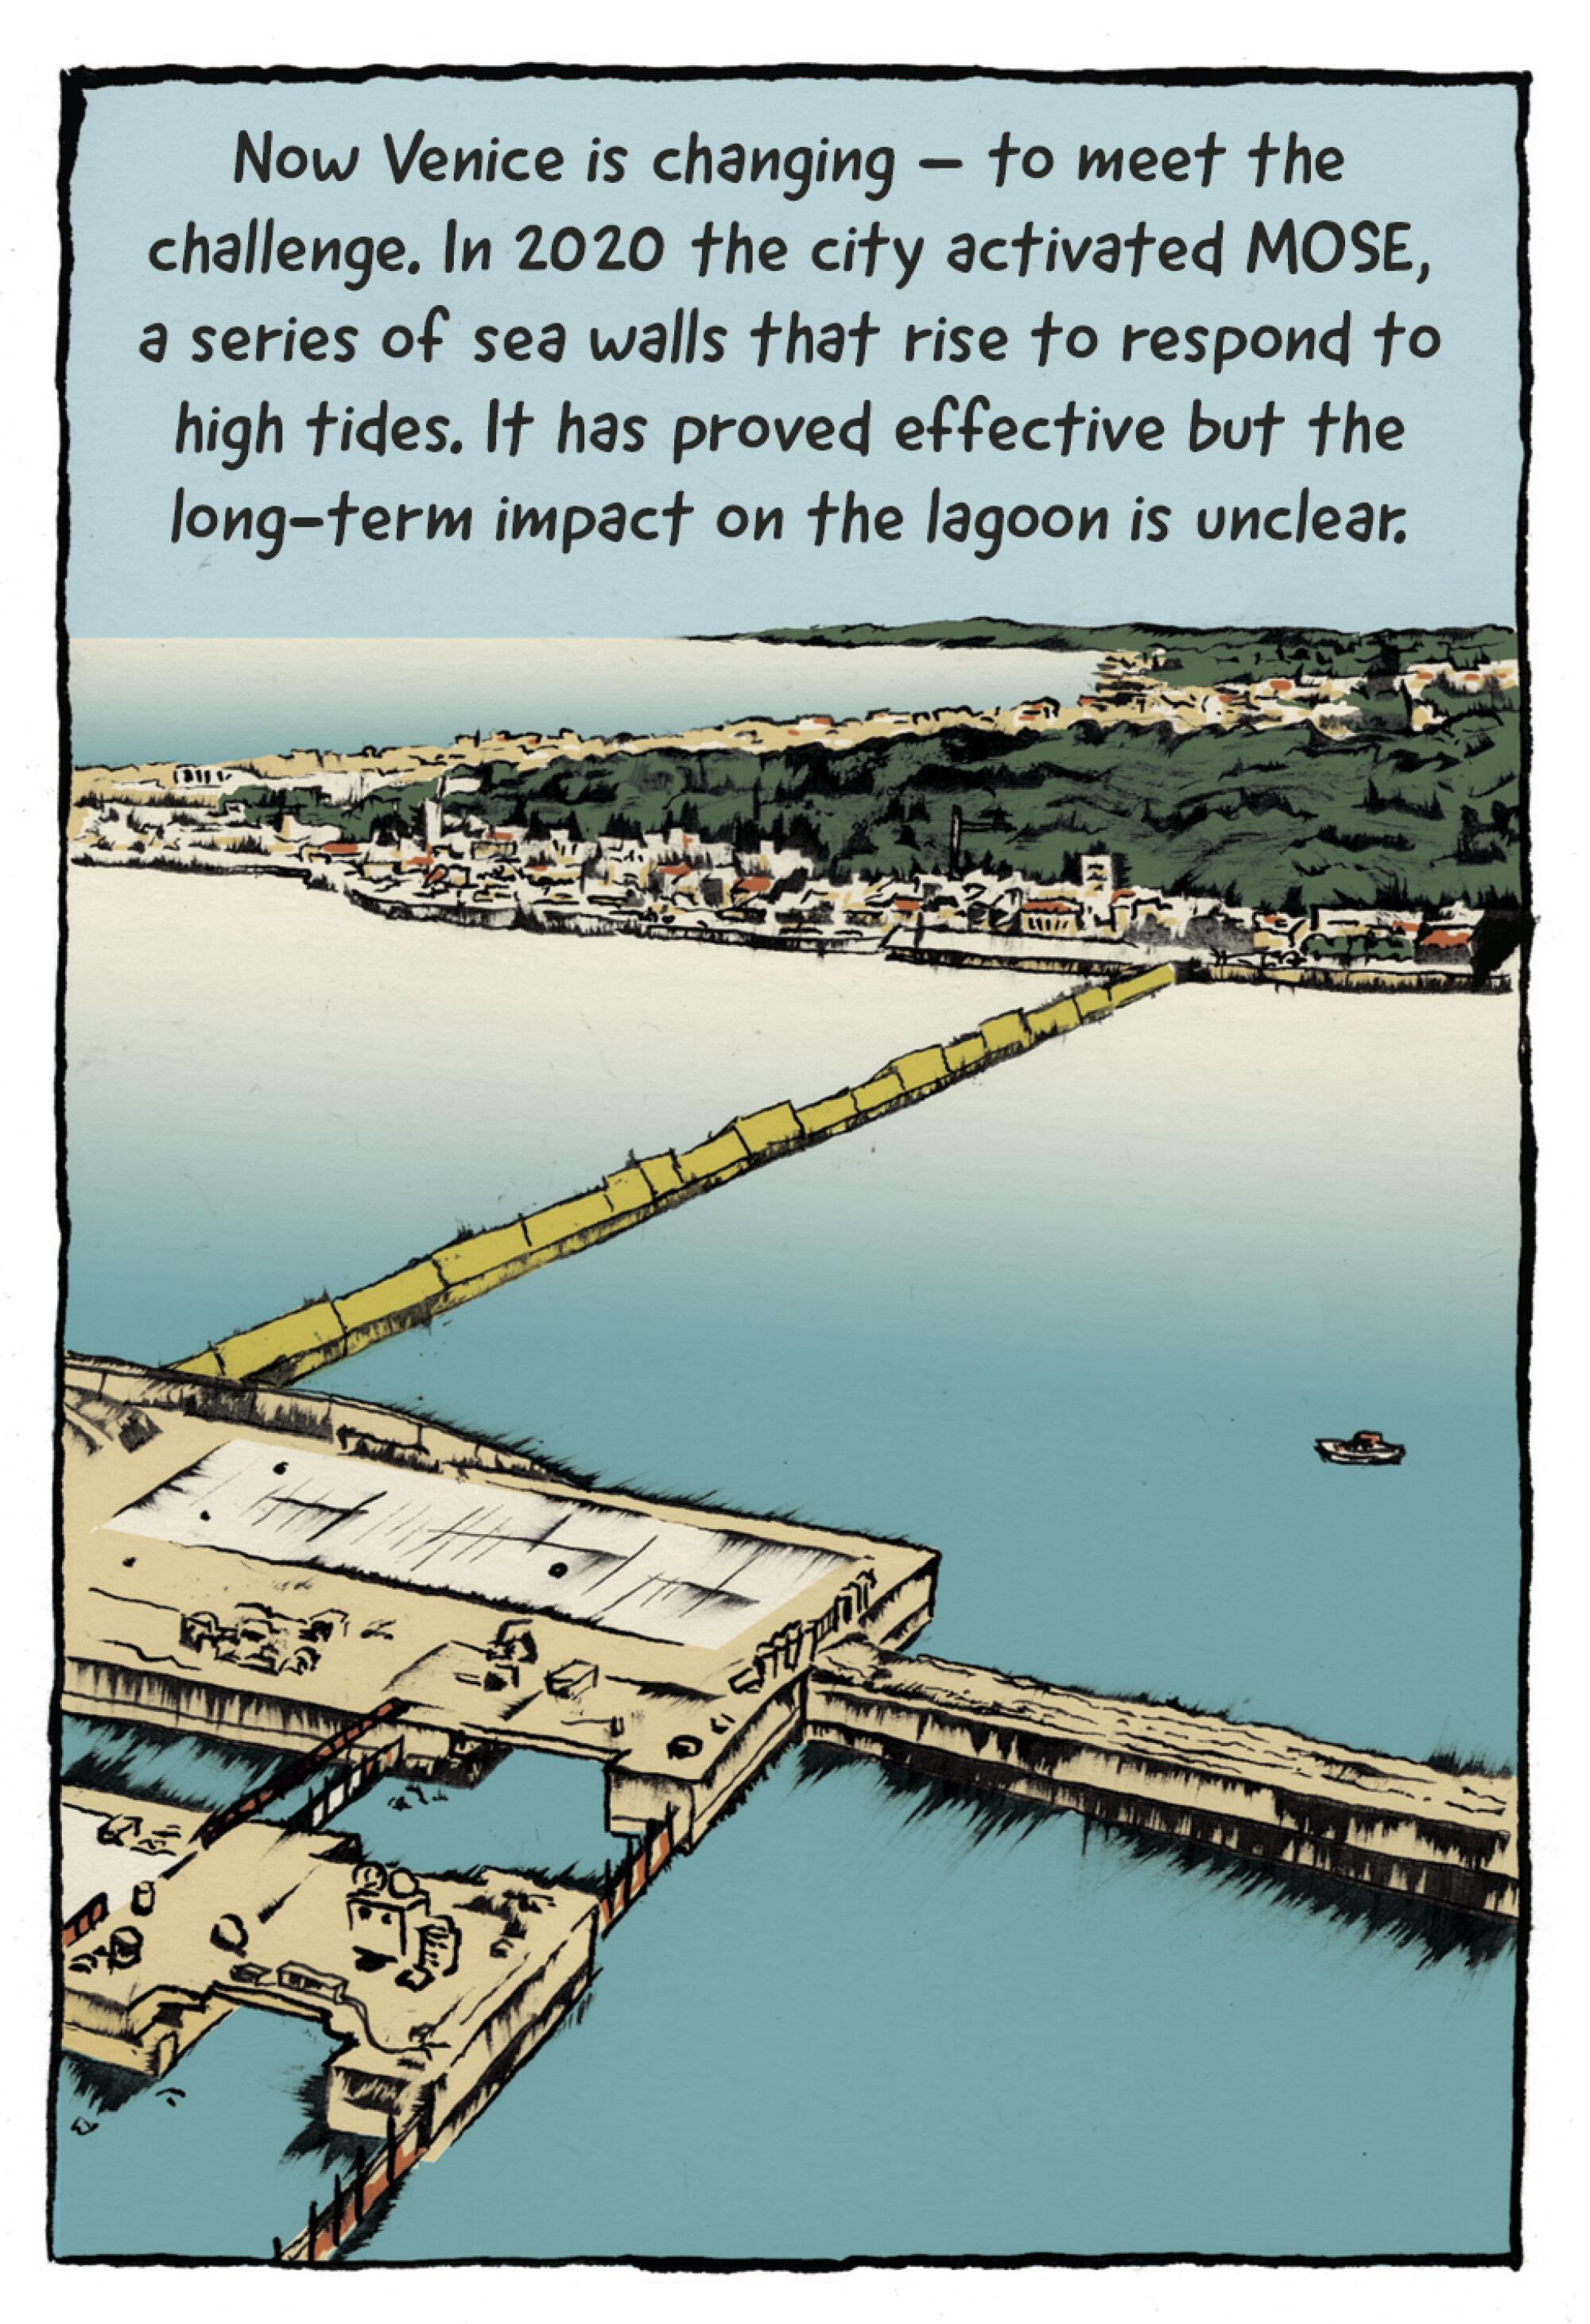 Now Venice is changing to meet the challenge. In 2020 the city activated sea walls that rise to respond to high tides.